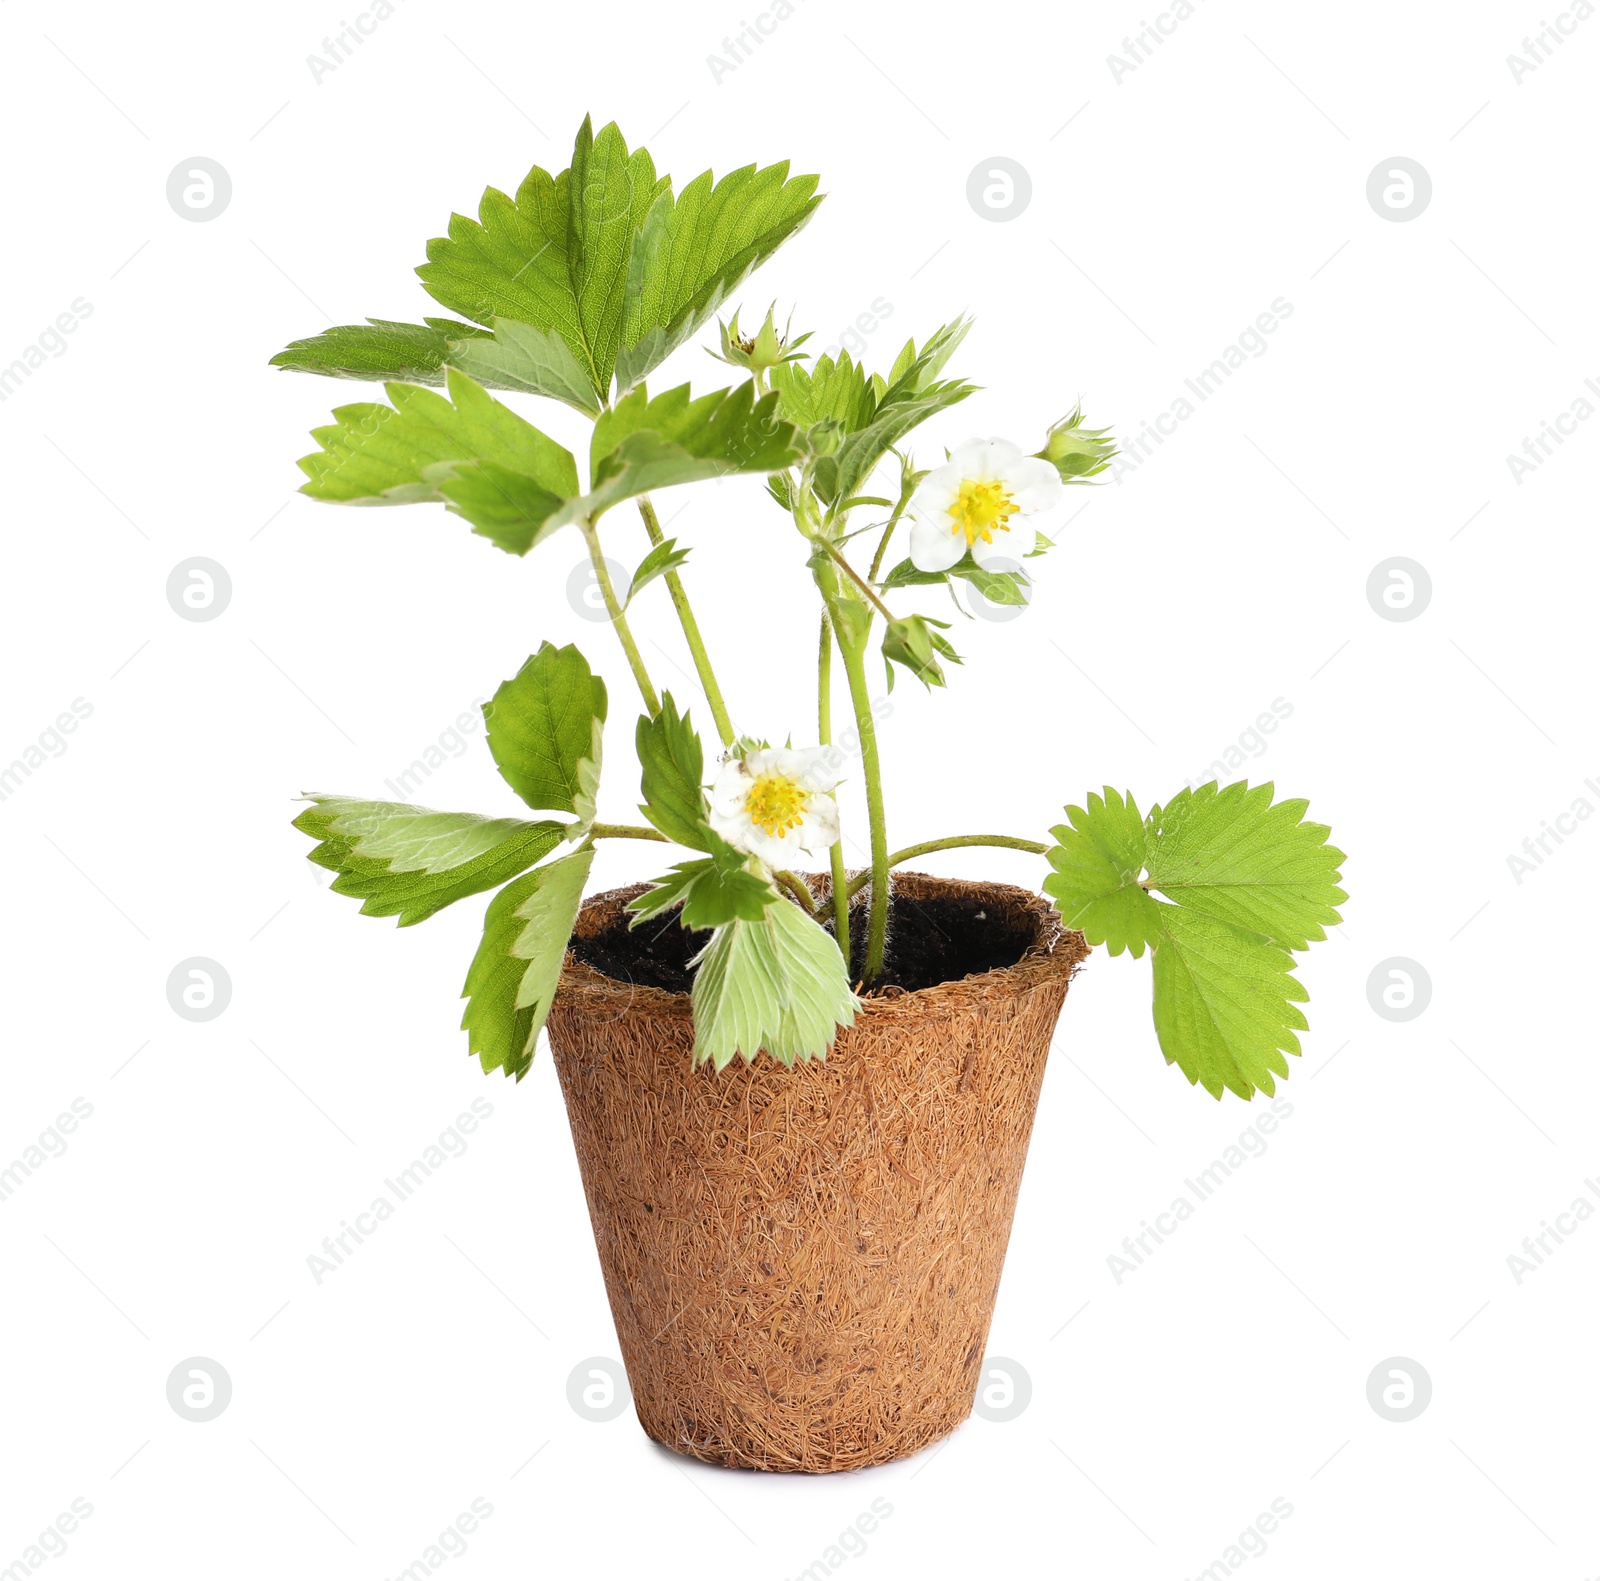 Photo of Potted strawberry seedling with leaves and flowers isolated on white